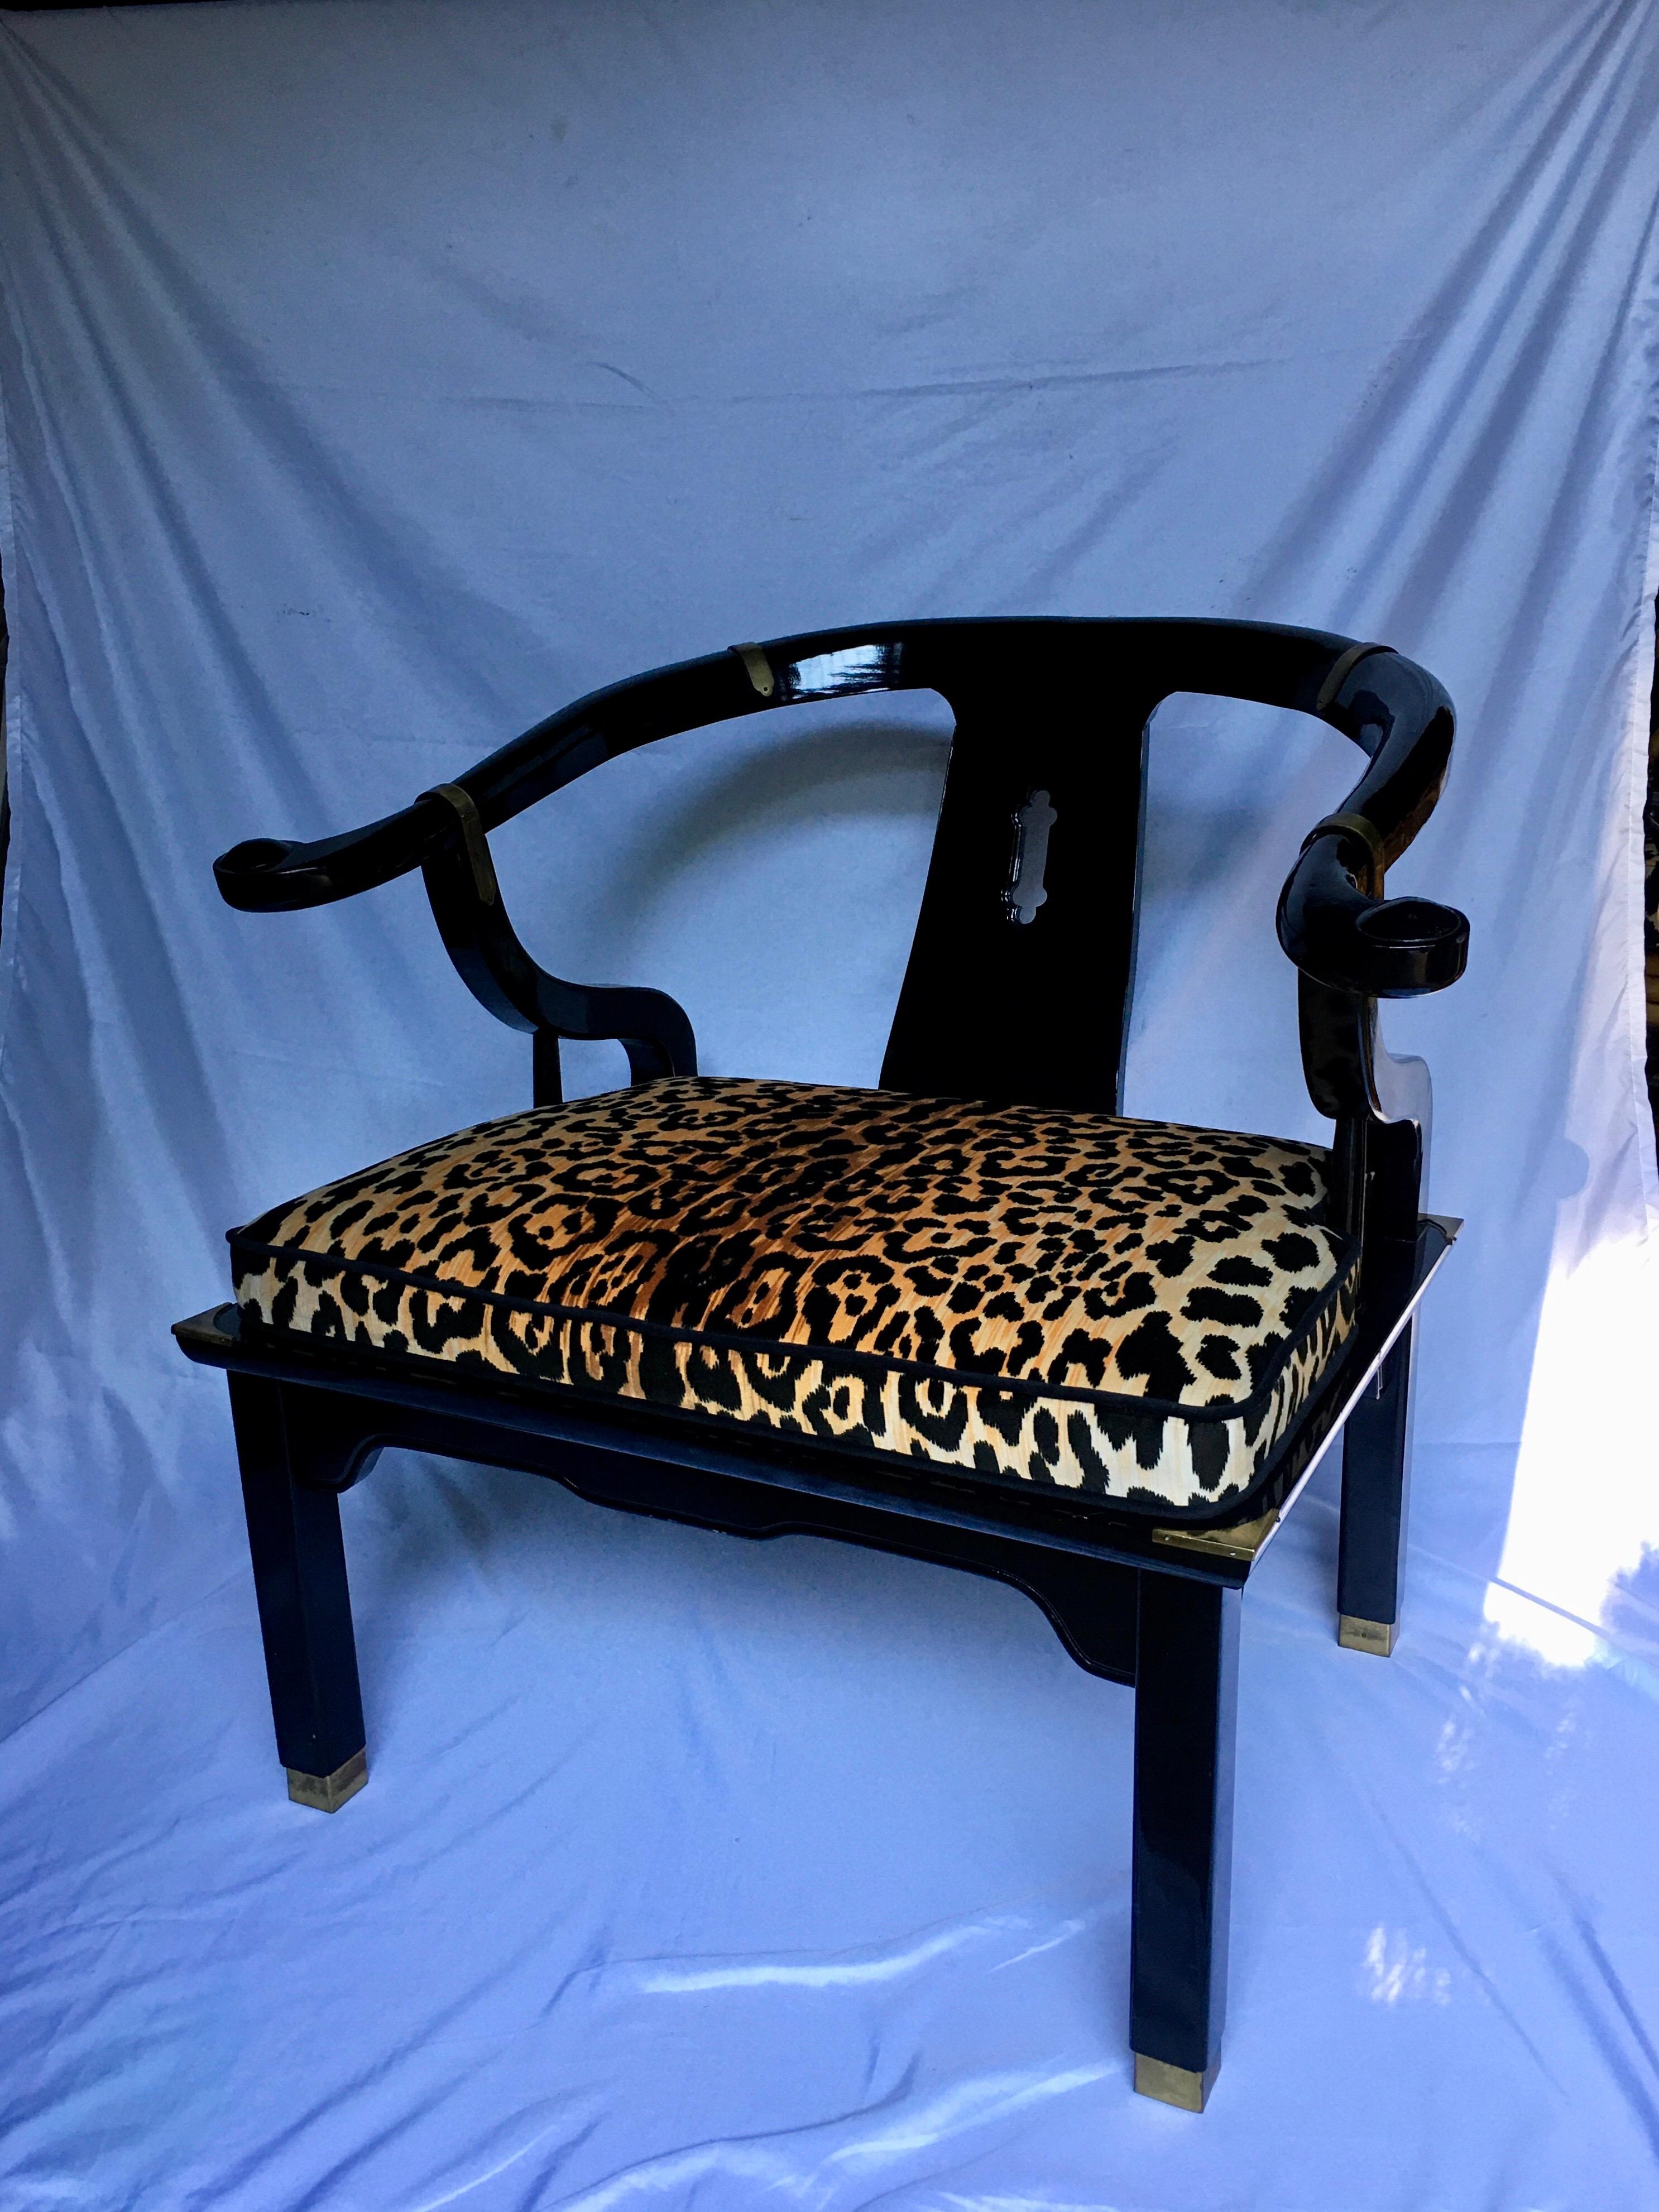 Hollywood Regency style lounge accent chair by Century Furniture. This James Mont style armchair features a gloss black lacquer wood frame with brass hardware accents. Cushion is newly upholstered in a cotton-velvet animal print fabric and piped in